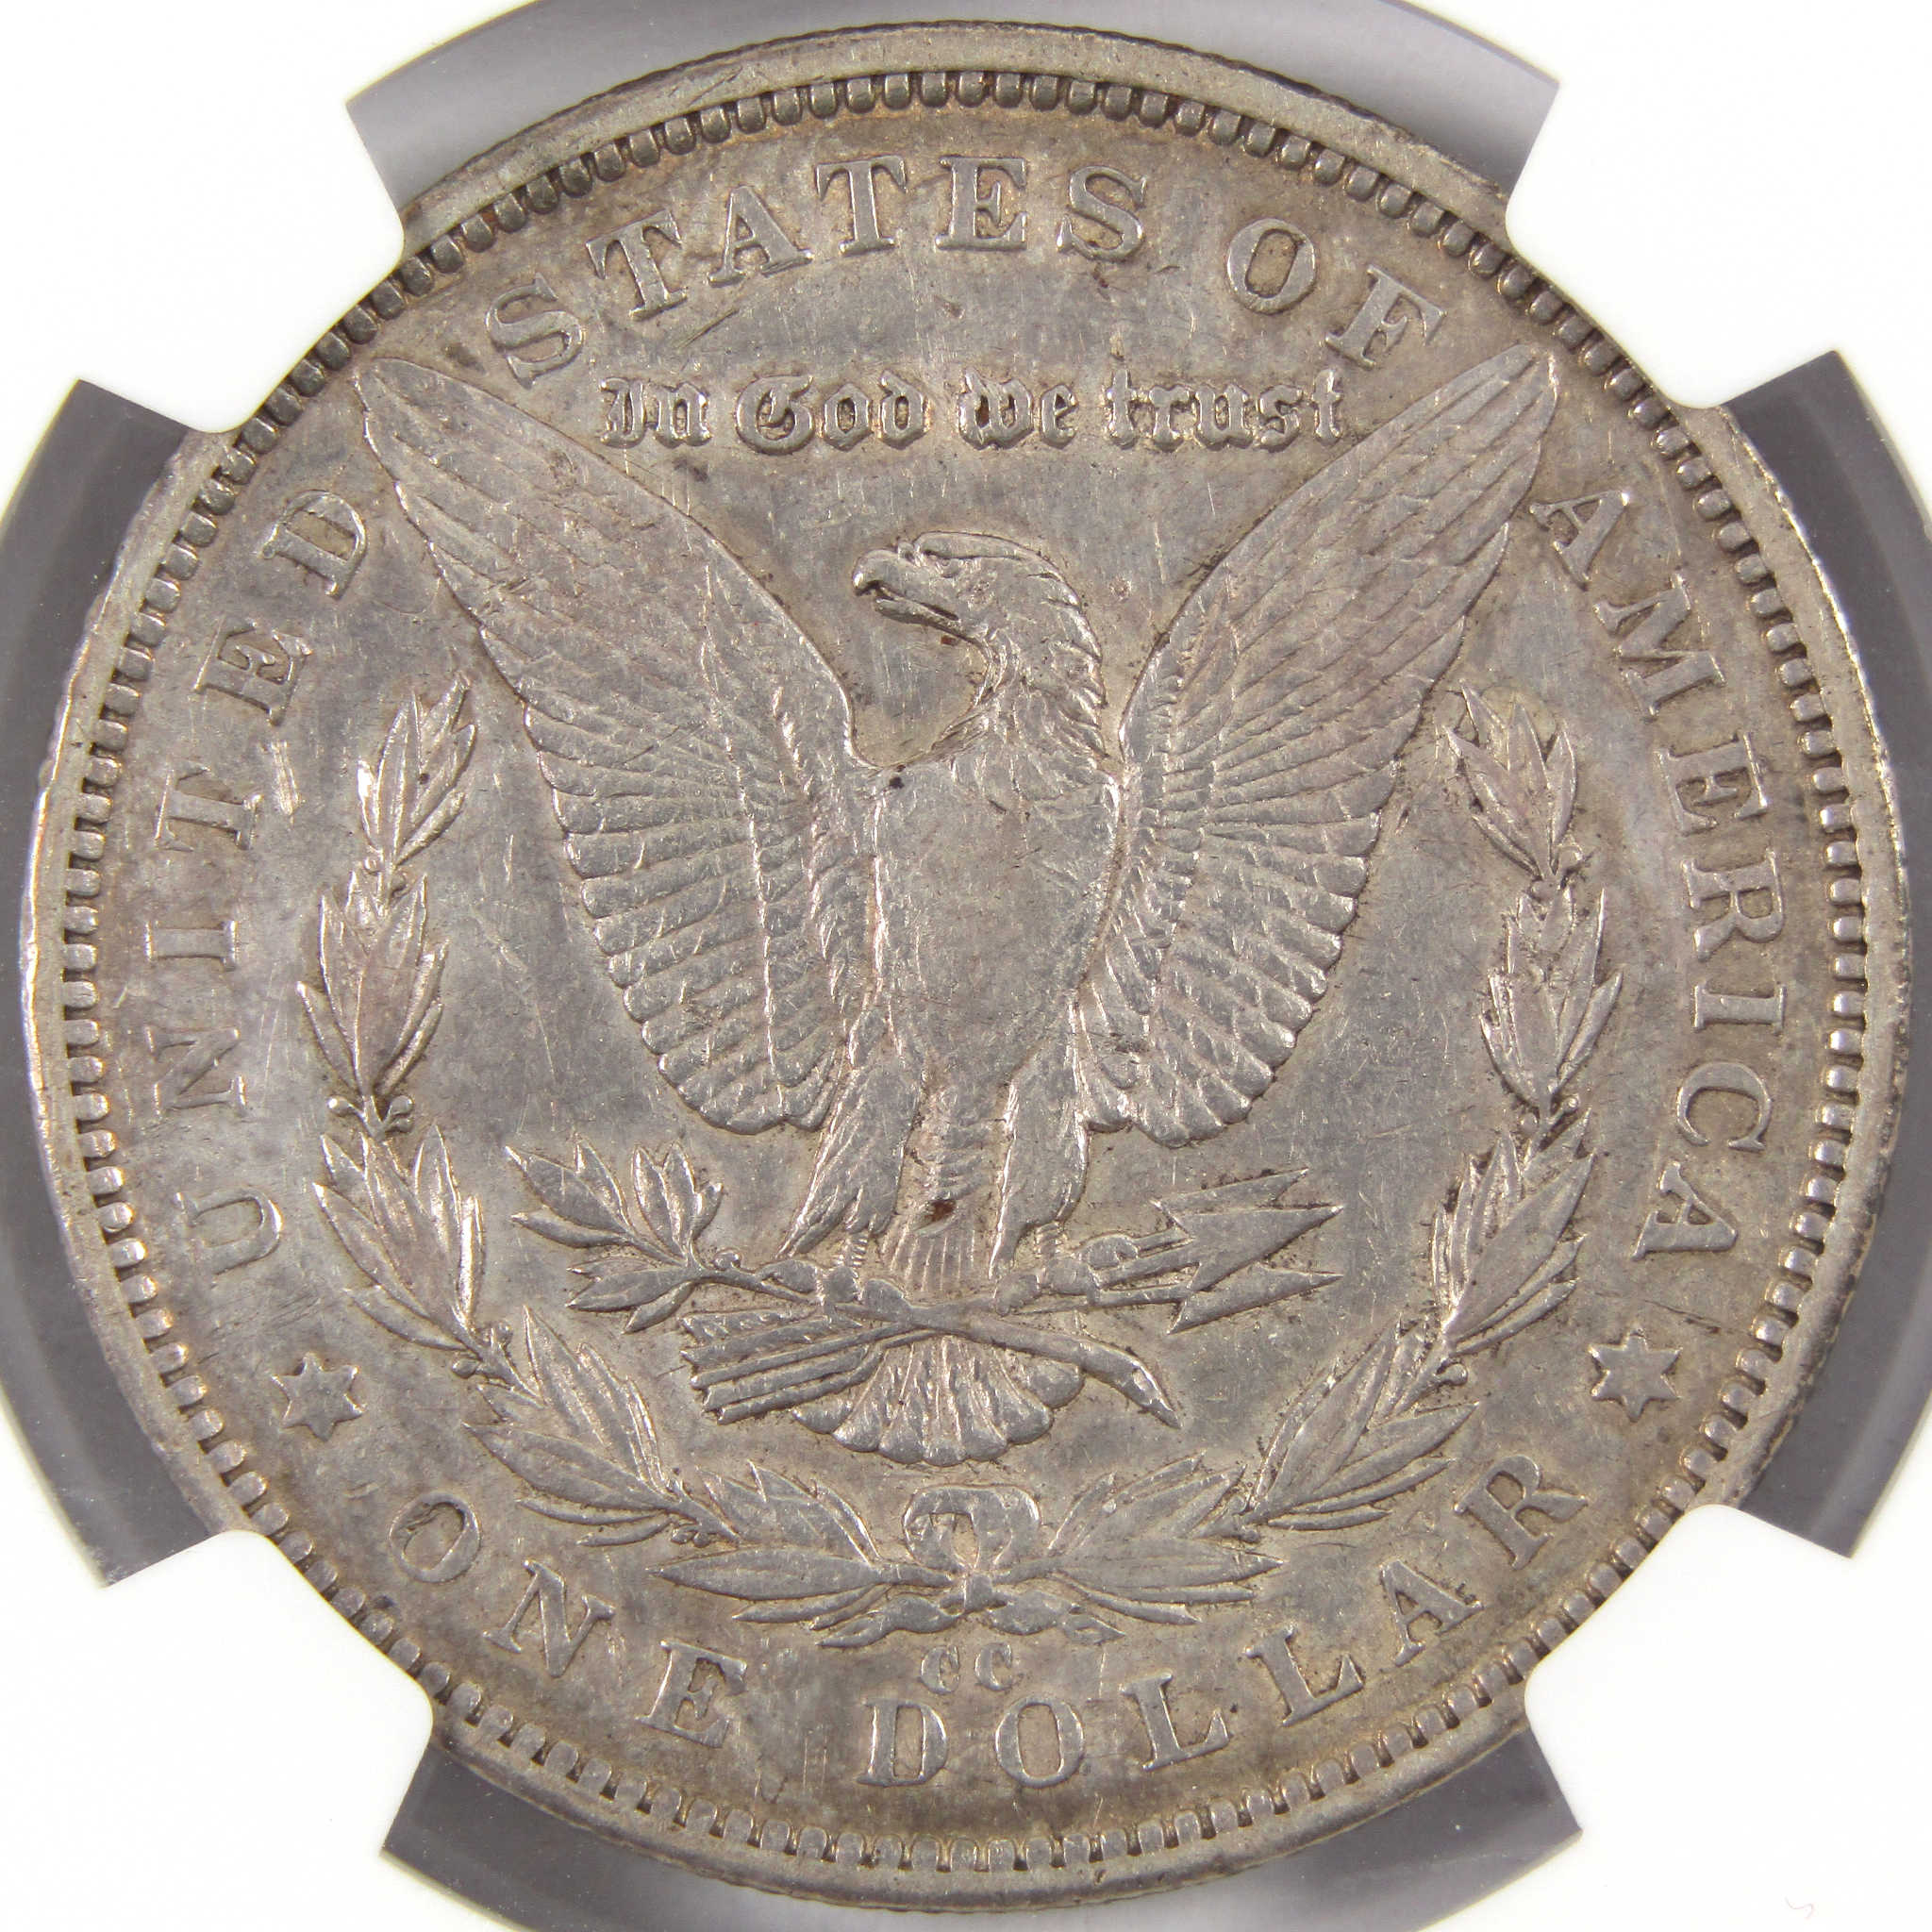 1892 CC Morgan Dollar XF Details NGC 90% Silver $1 Coin SKU:I9479 - Morgan coin - Morgan silver dollar - Morgan silver dollar for sale - Profile Coins &amp; Collectibles